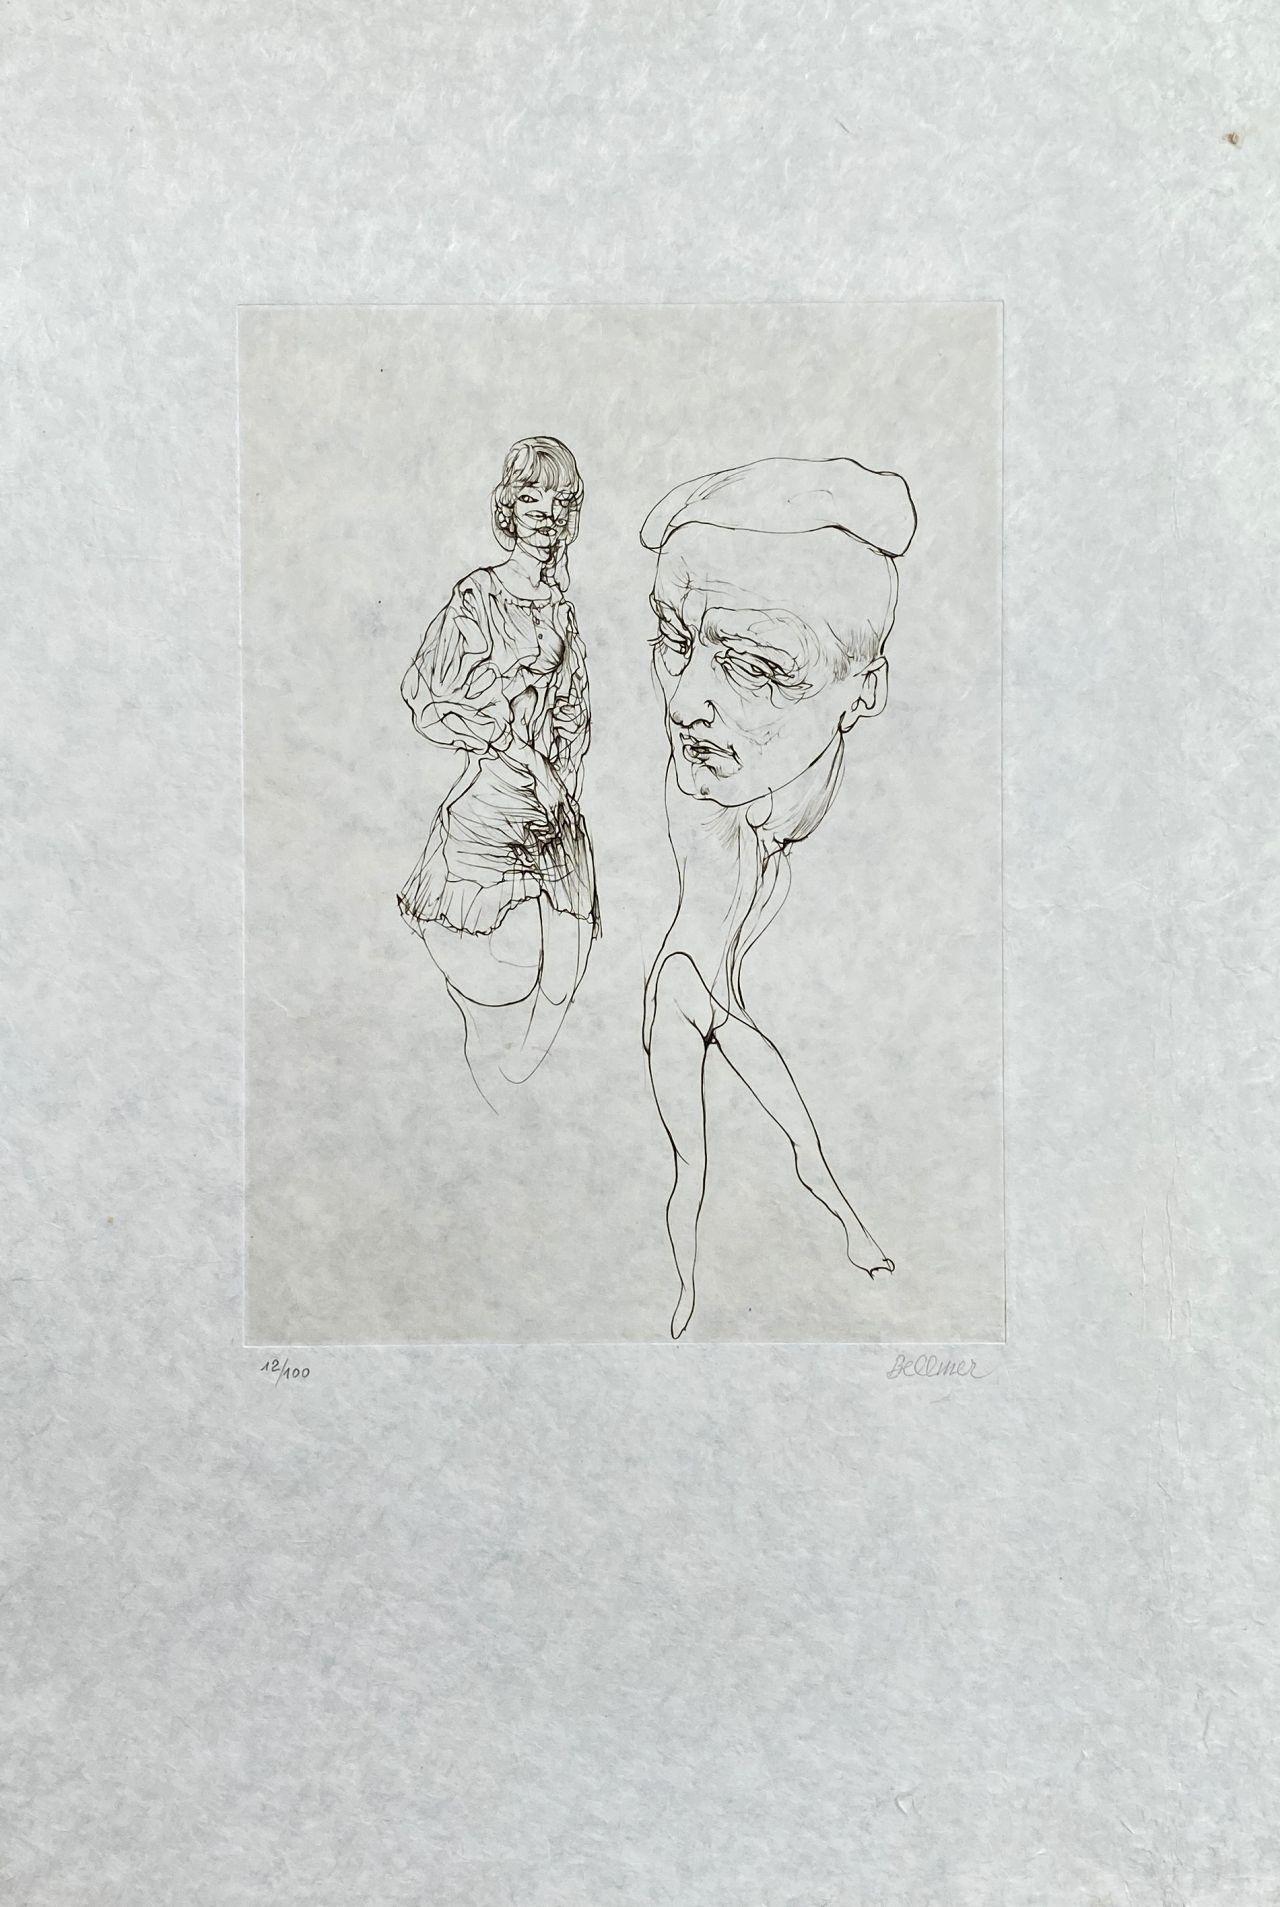 Hans Bellmer Portrait Print - Man With a Cap - Original Etching Hand Signed Numbered - 100 copies